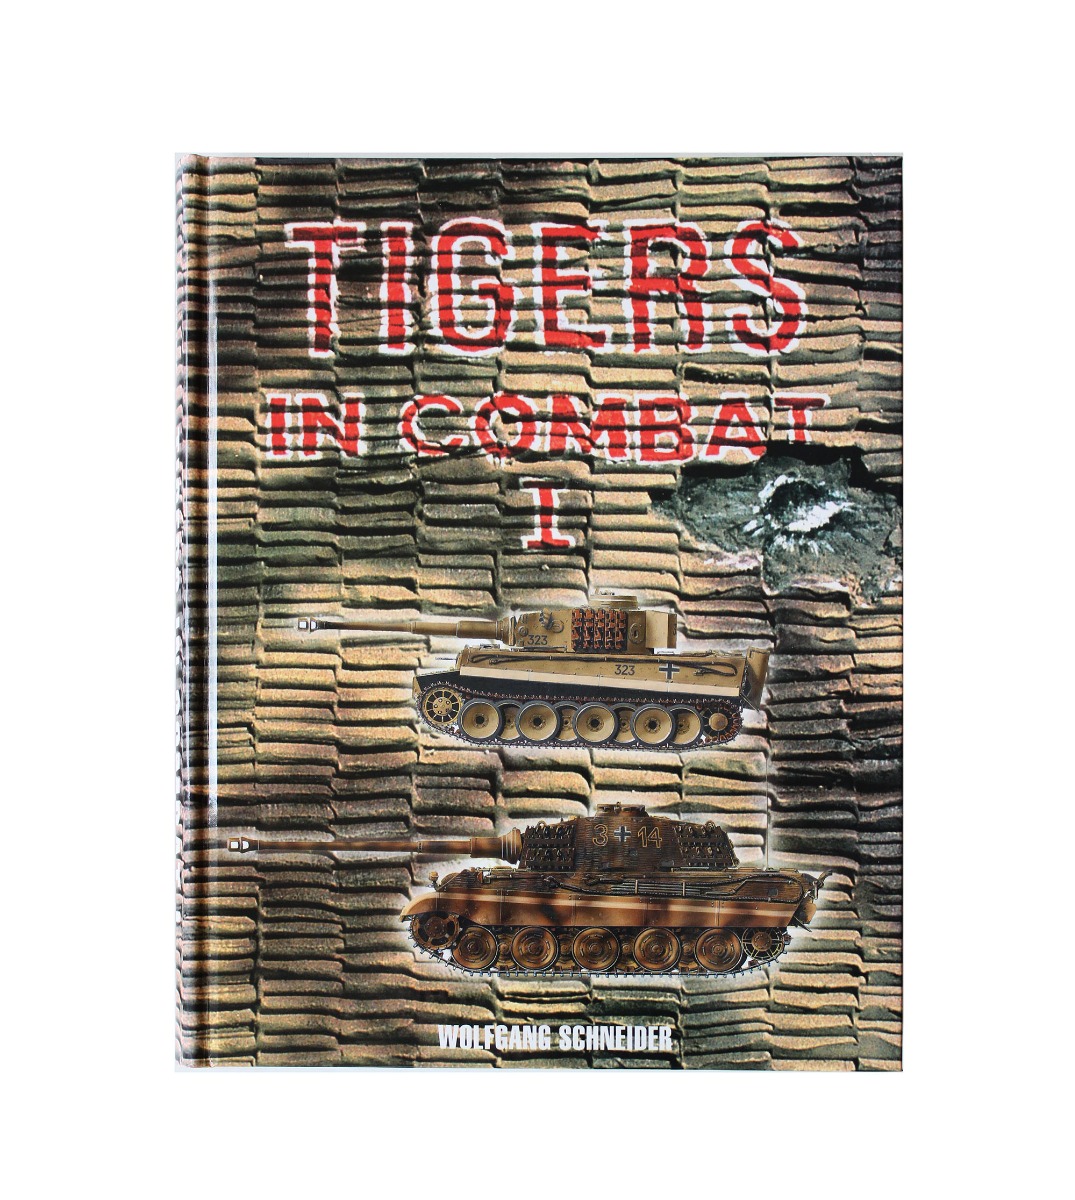 TIGERS IN COMBAT I BOOK BY WOLFGANG SCHNEIDER HARDCOVER 